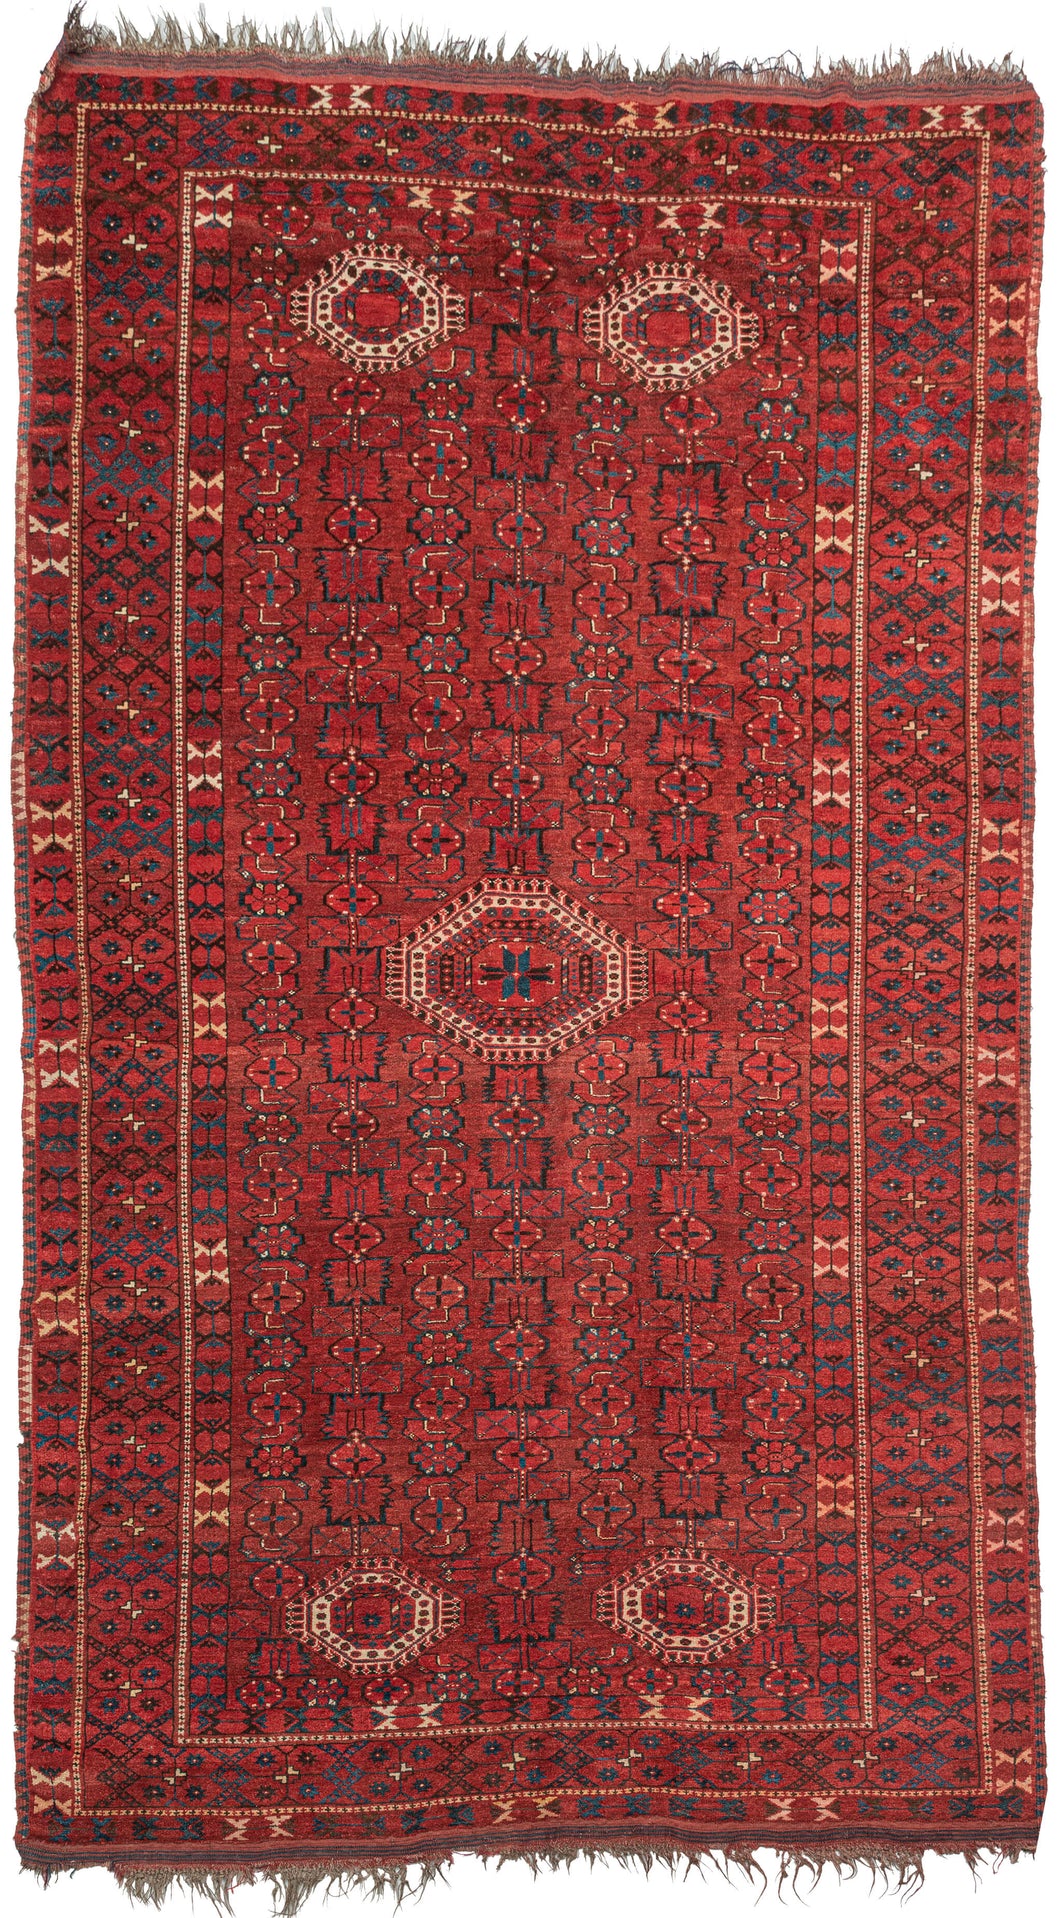 Beshir Turkmen rug handwoven along the Amu Darya river in Central Asia.  It features one large central medallion and four smaller medallions on the top and bottom of this wide and narrow format which is common for type. The medallions sit at an all over design of an abstracted herati variation with wide leaves, rounded rosettes and arrow like forms. various borders of tulips, evil eyes and eight pointed rosettes. 